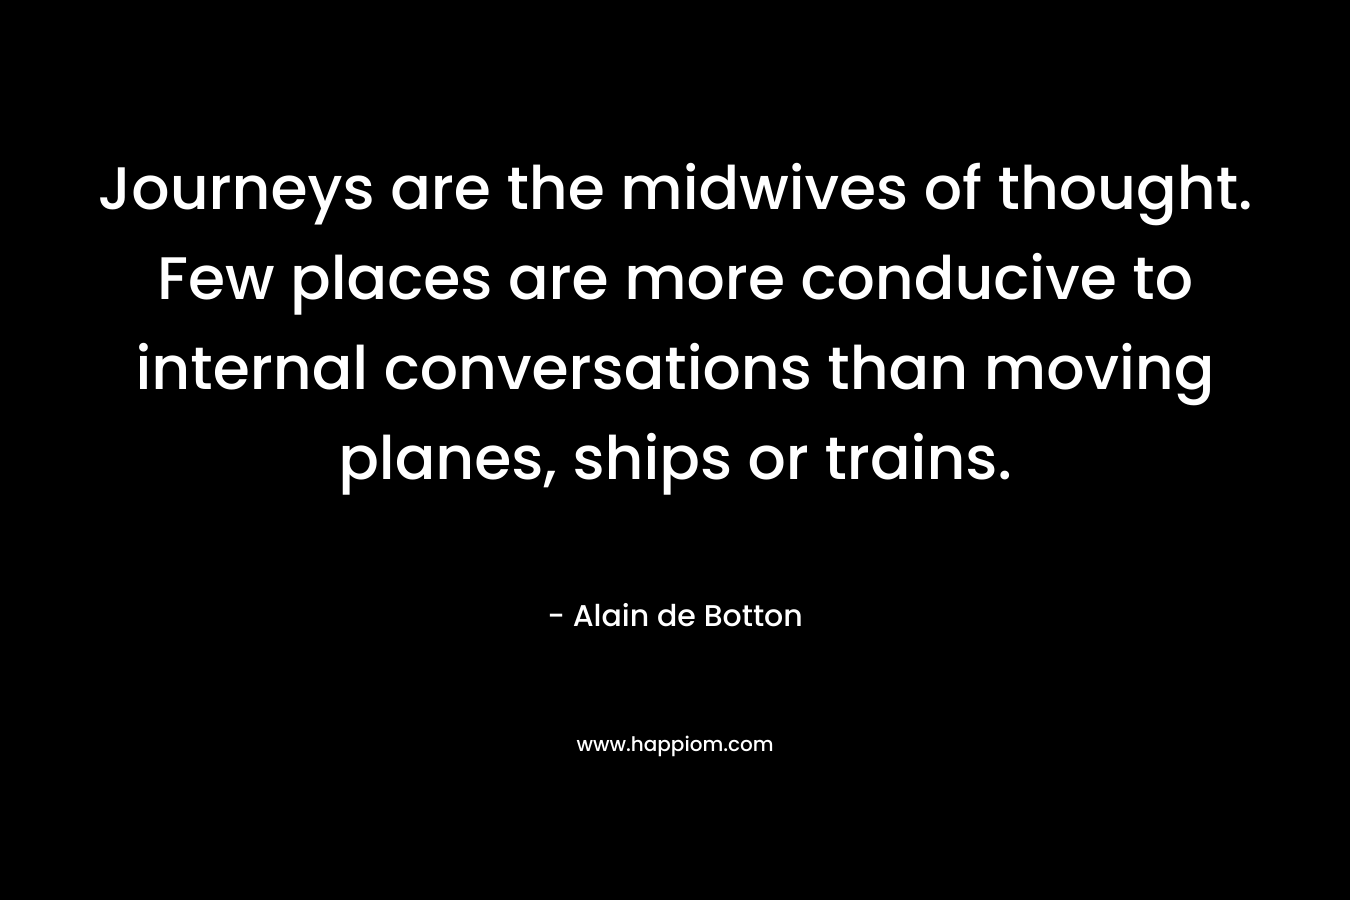 Journeys are the midwives of thought. Few places are more conducive to internal conversations than moving planes, ships or trains.